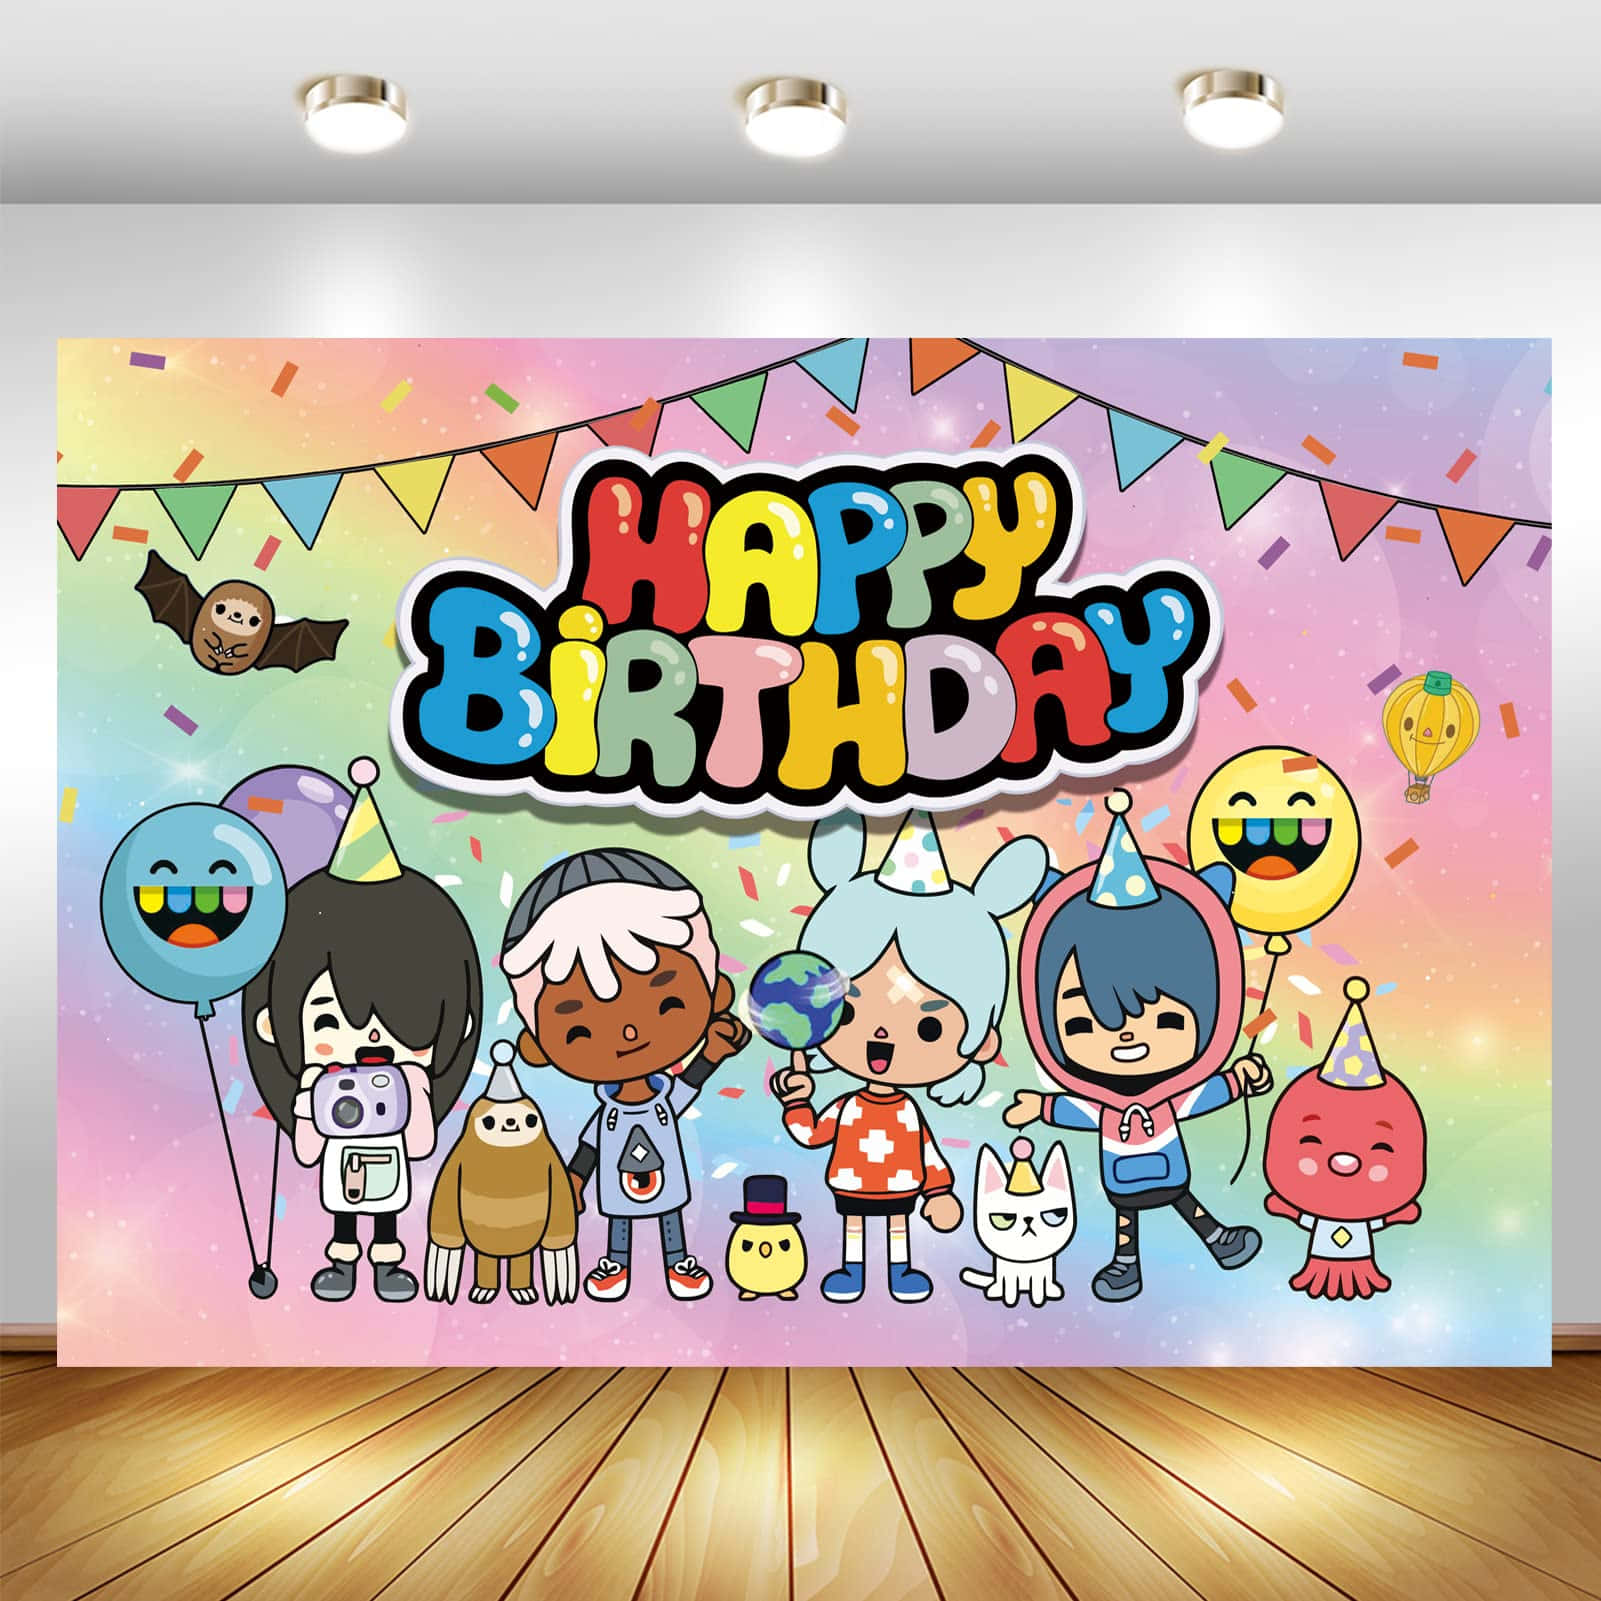 Have Fun with Toca Boca!